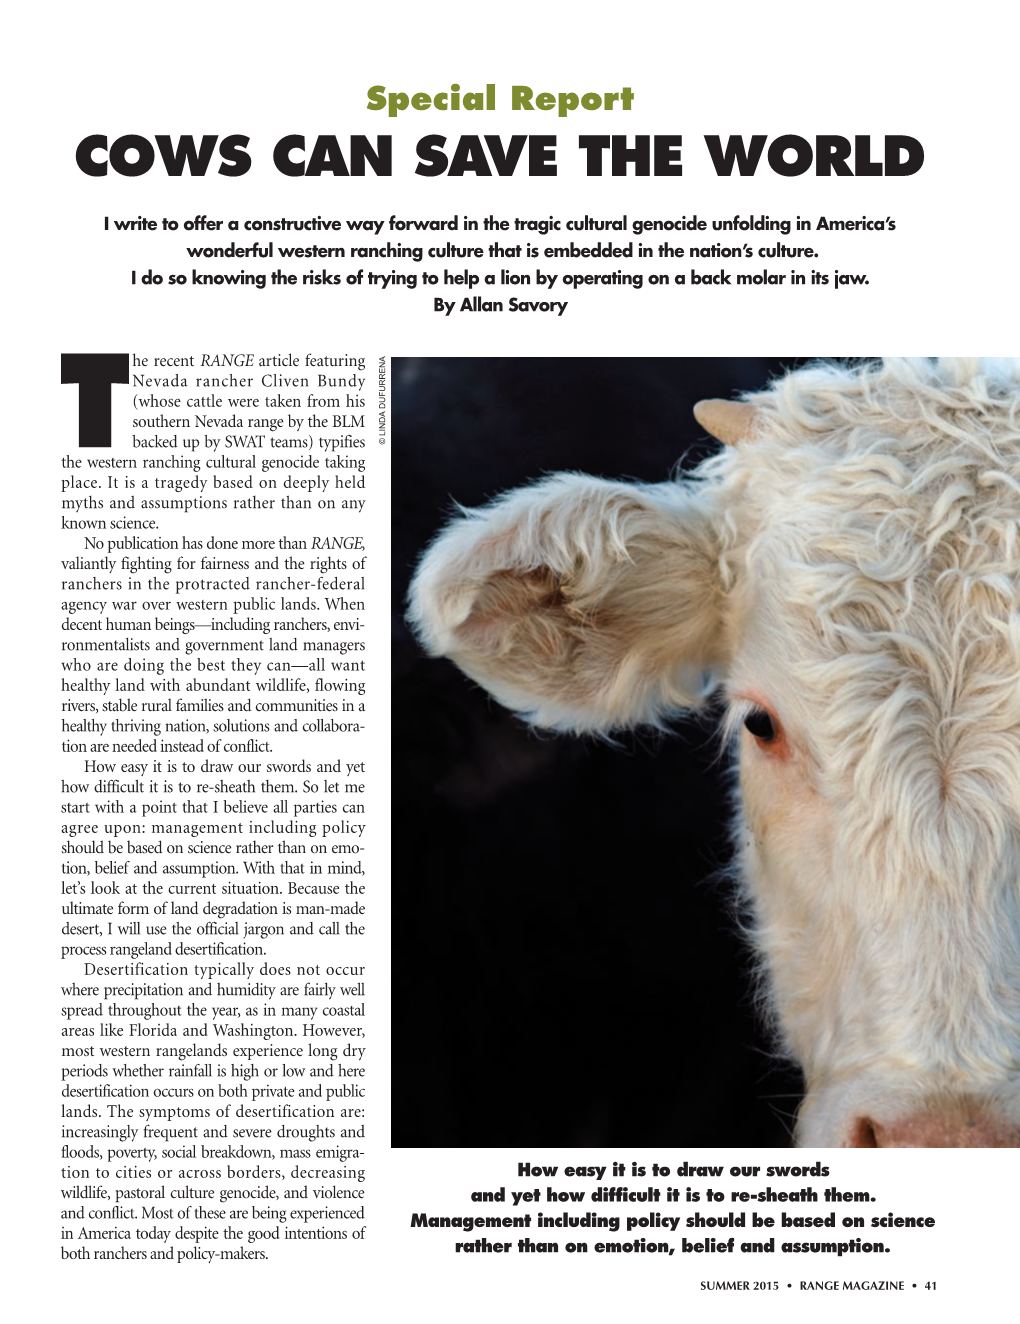 RANGE Magazine, Summer 2015-Special Report-Cows Can